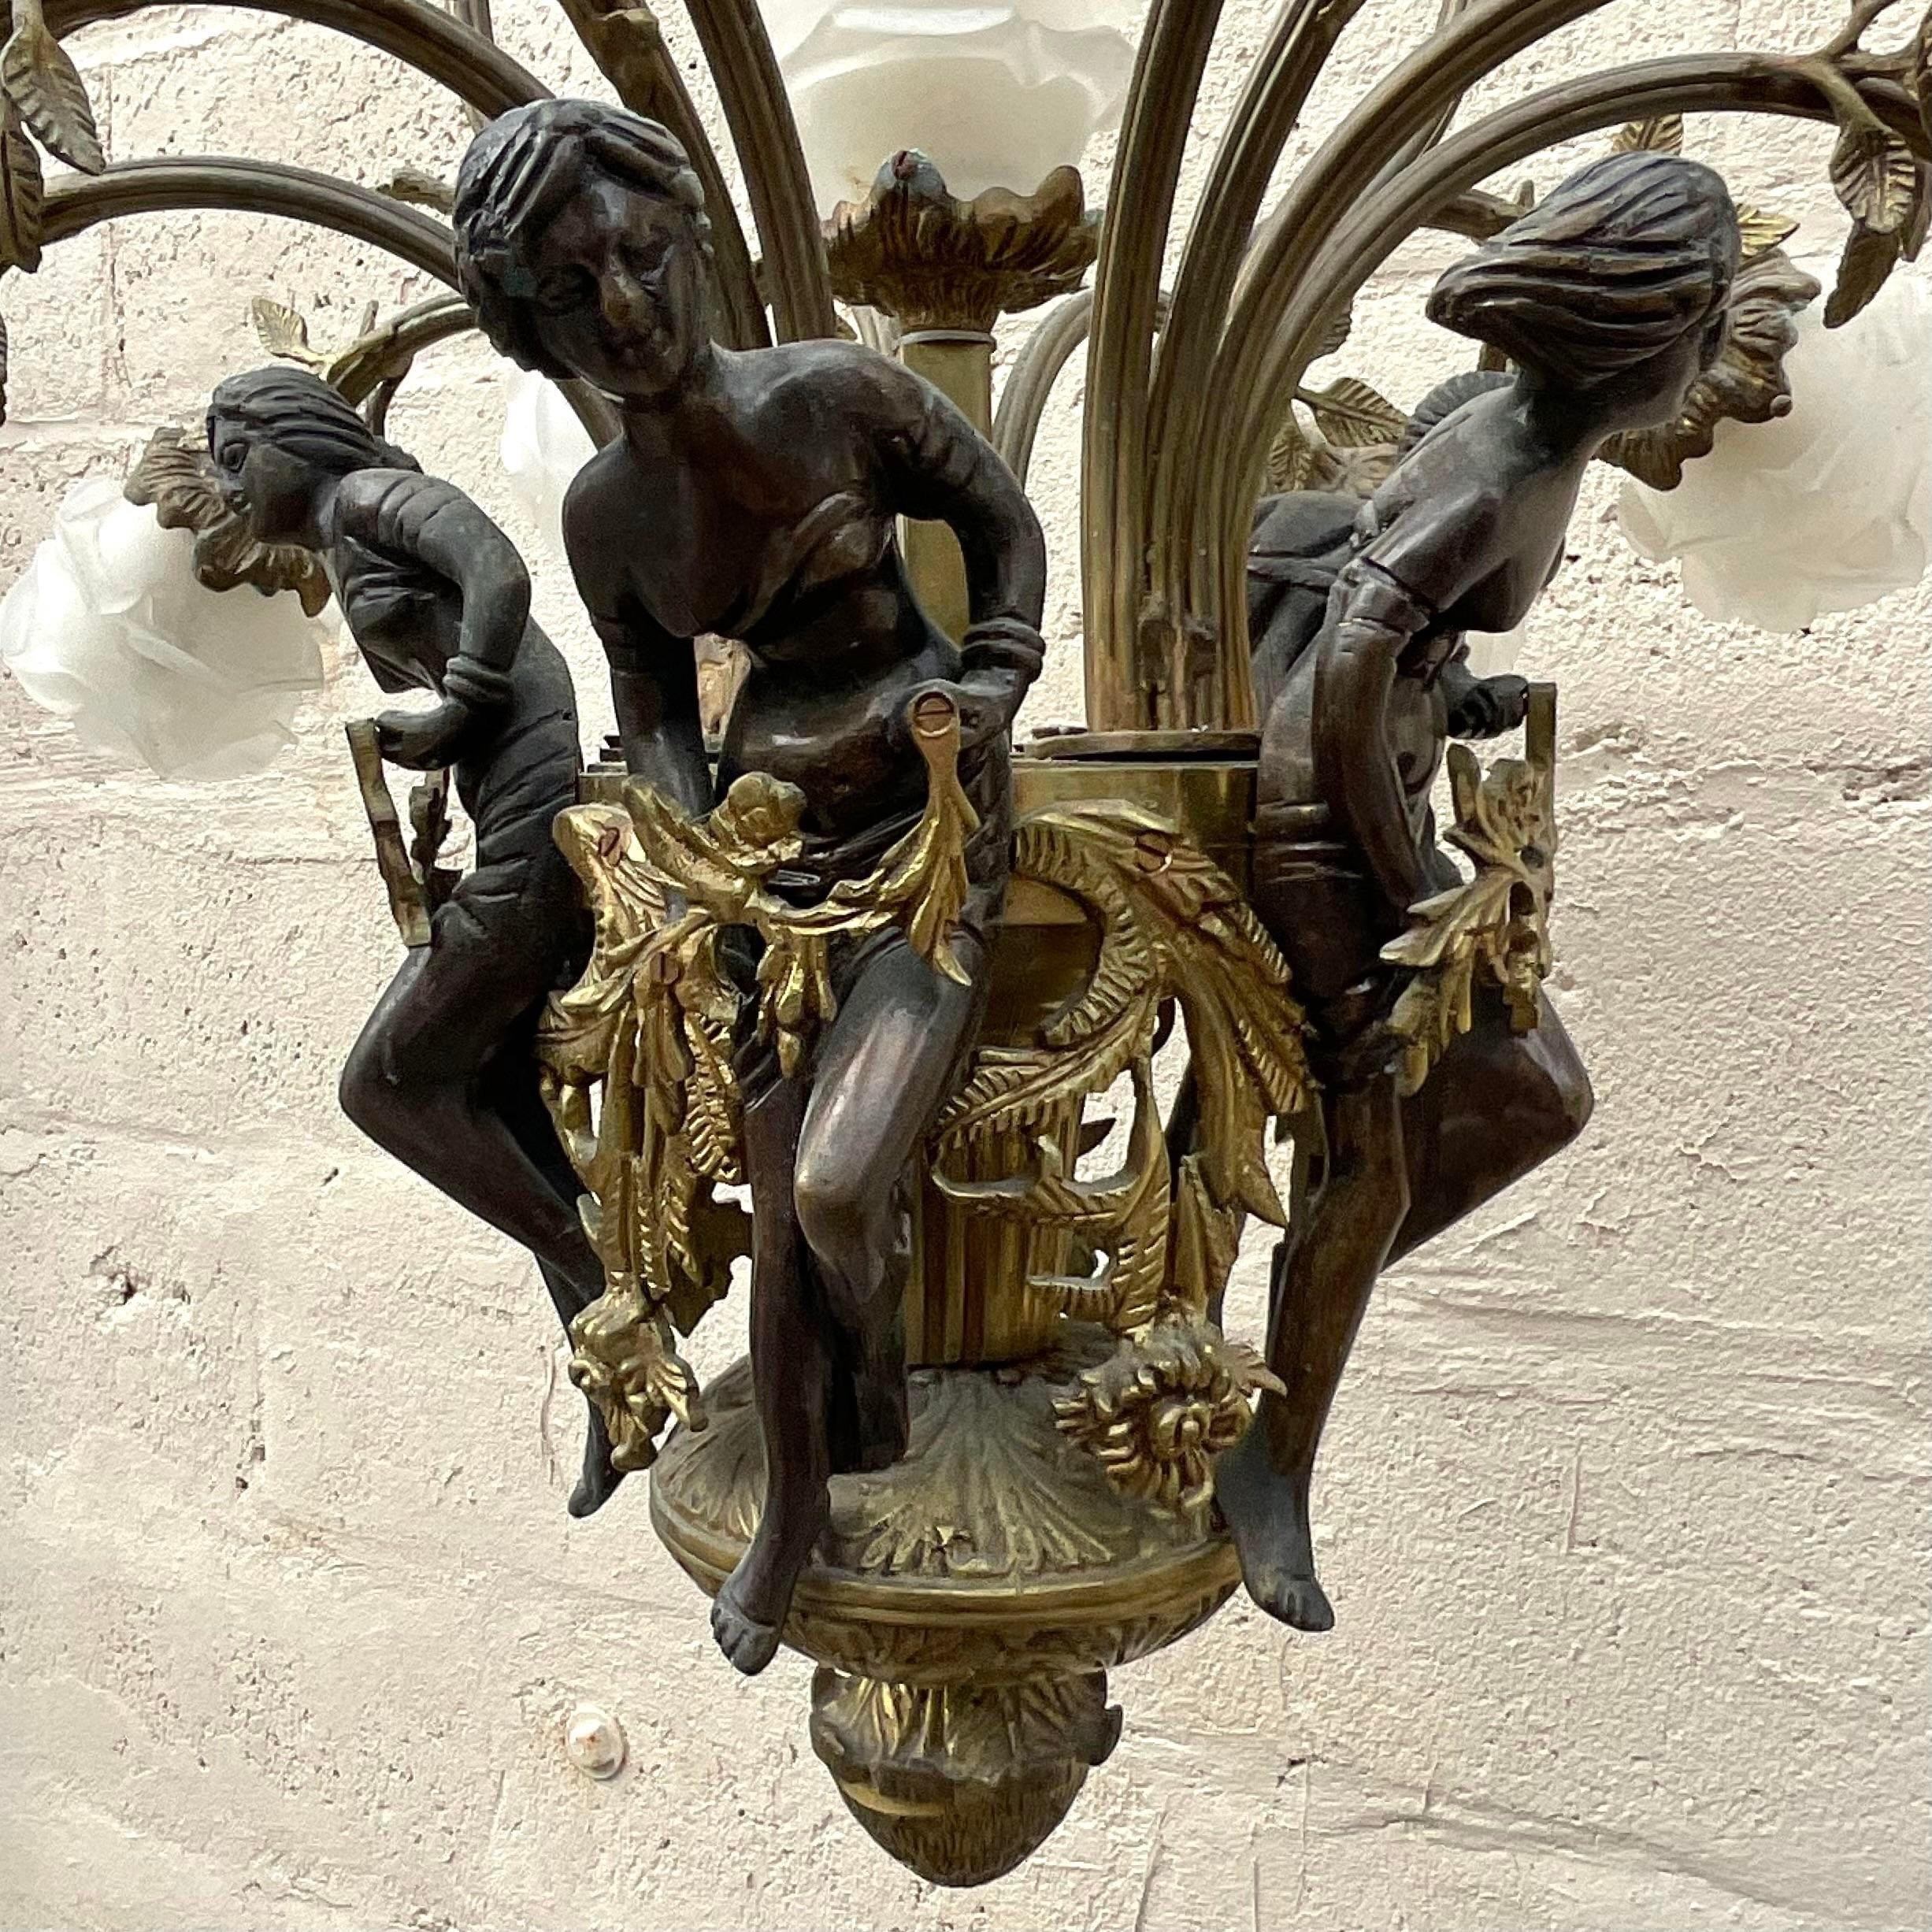 A stunning vintage Regency bronze chandelier. A chic Art Nouveau period piece with a ring of female figures and frosted rose glass shades. Acquired from a Palm Beach estate.